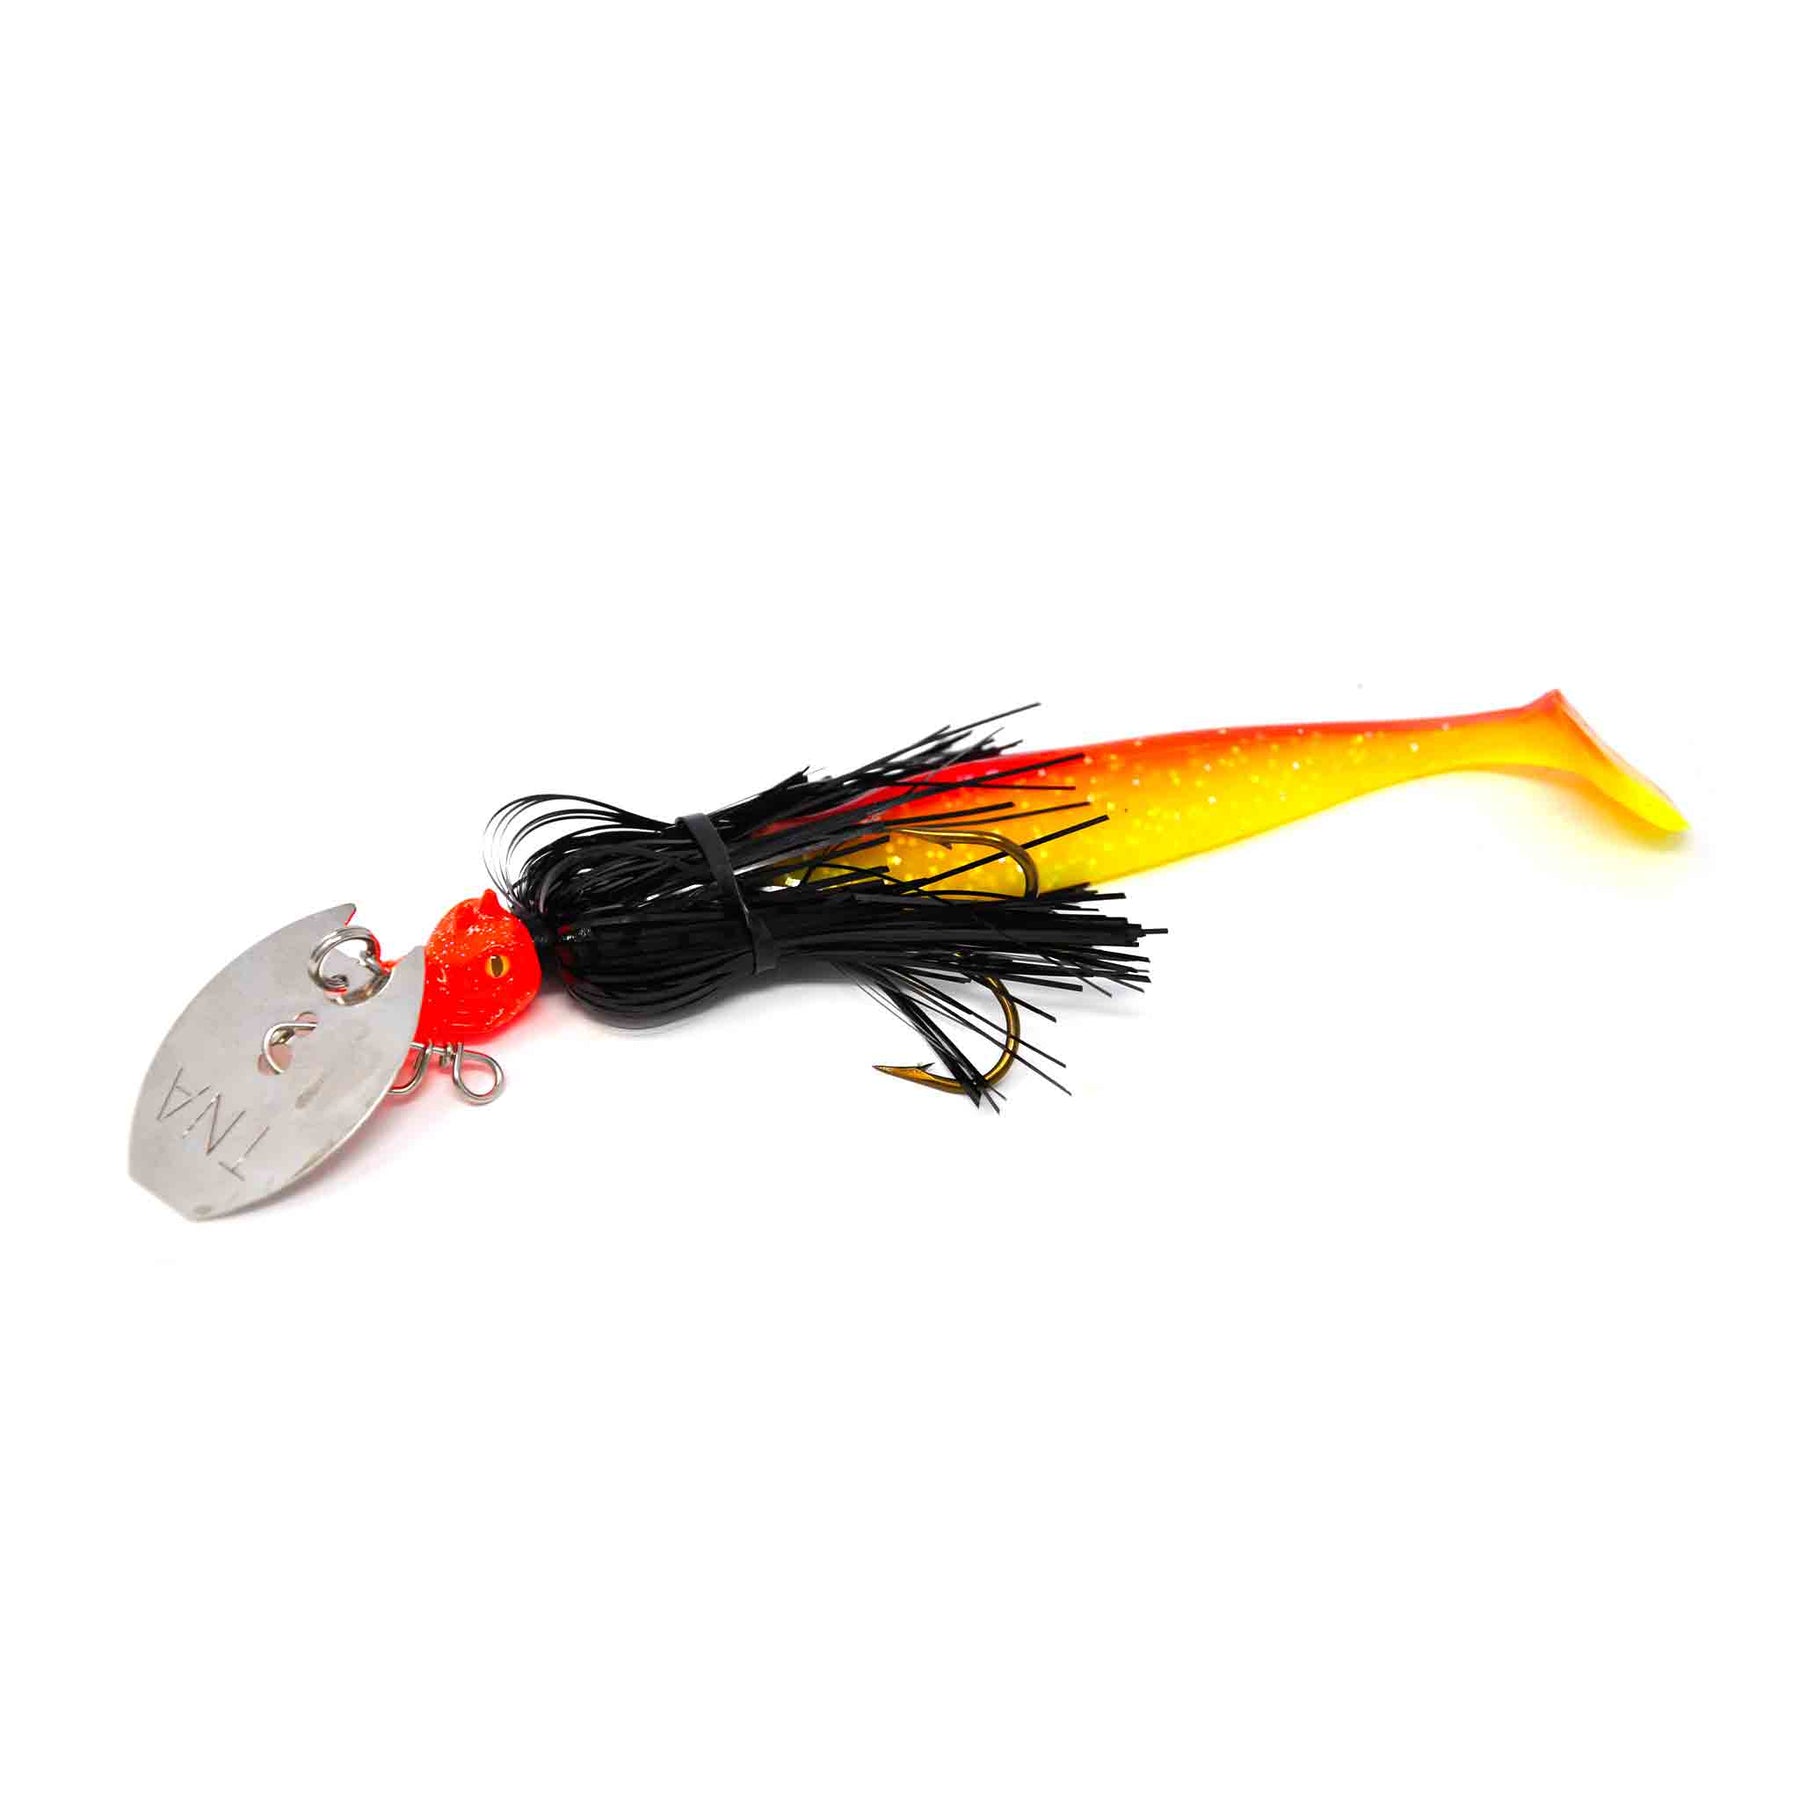 View of Chatterbaits TnA Tackle Micro Waggin Dragon Chatterbait Black Flame available at EZOKO Pike and Musky Shop